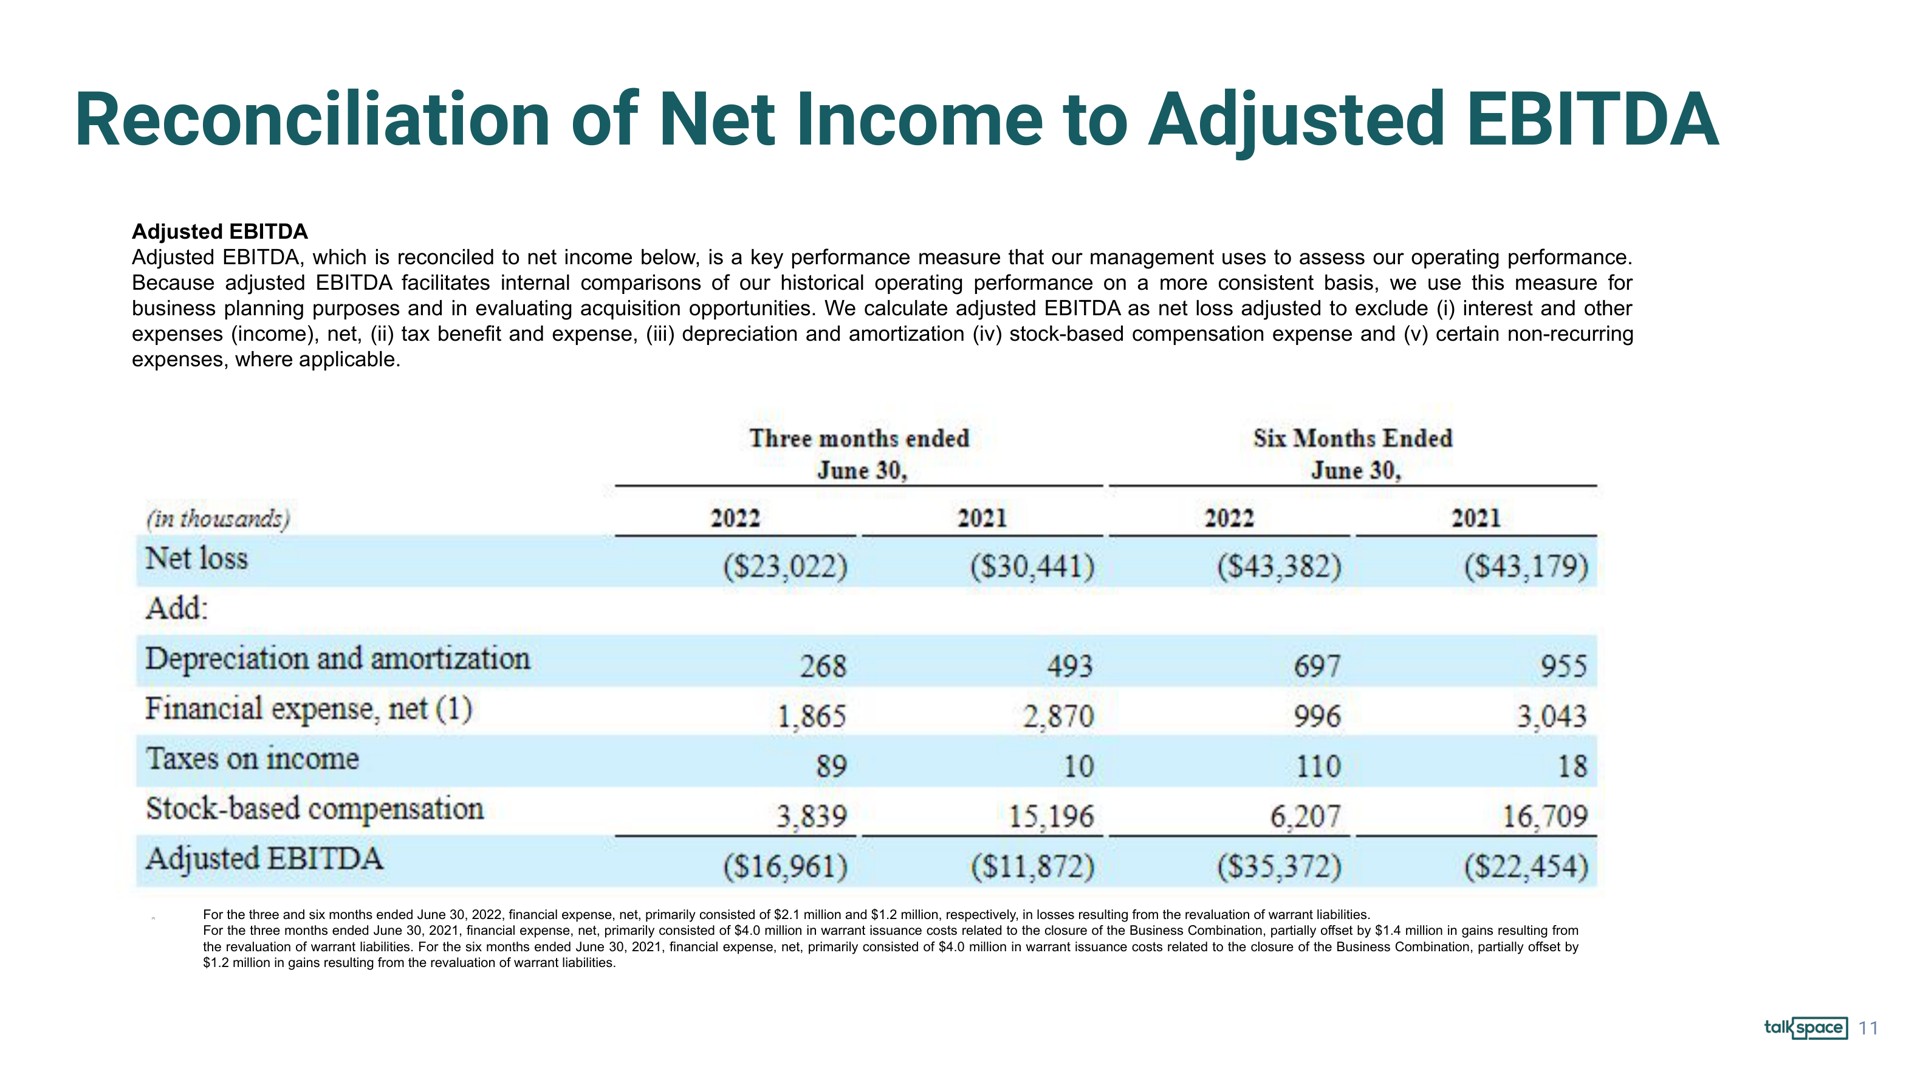 reconciliation of net income to adjusted financial expense | Talkspace